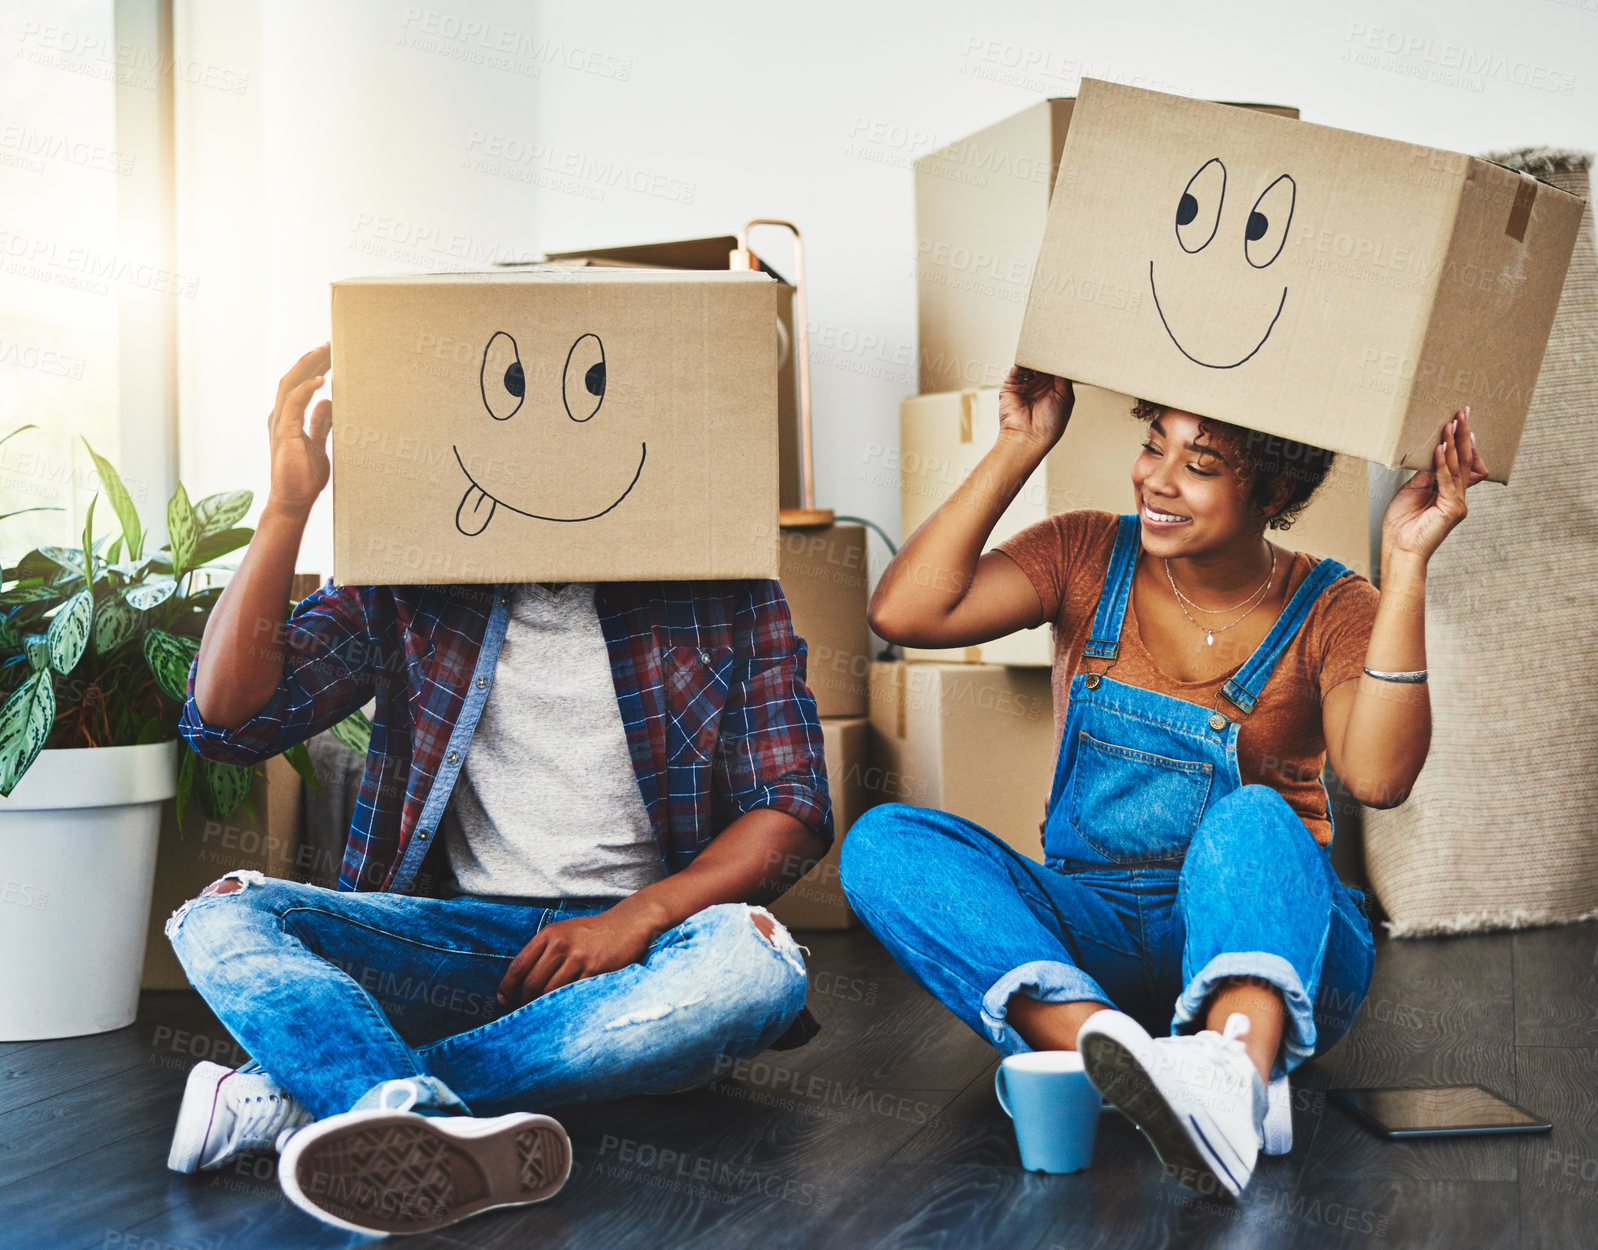 Buy stock photo Shot of a young couple moving house